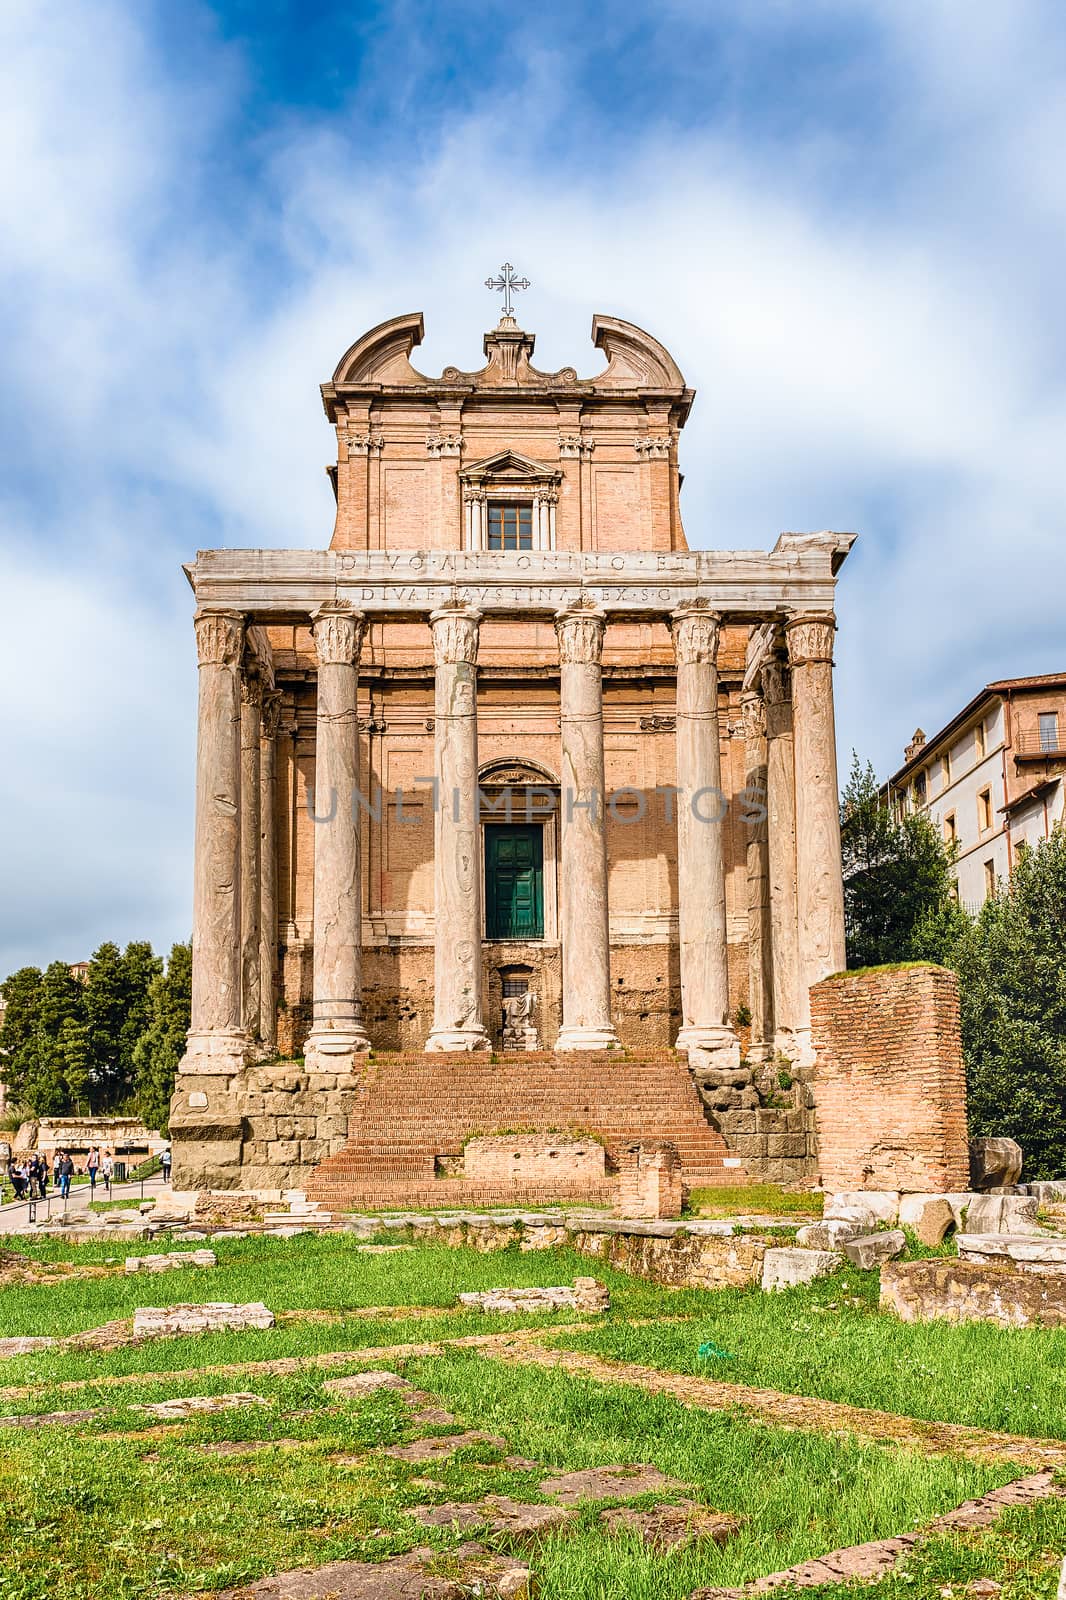 Ancient ruins of the Temple of Antoninus and Faustina inside the Roman Forum in Rome, Italy